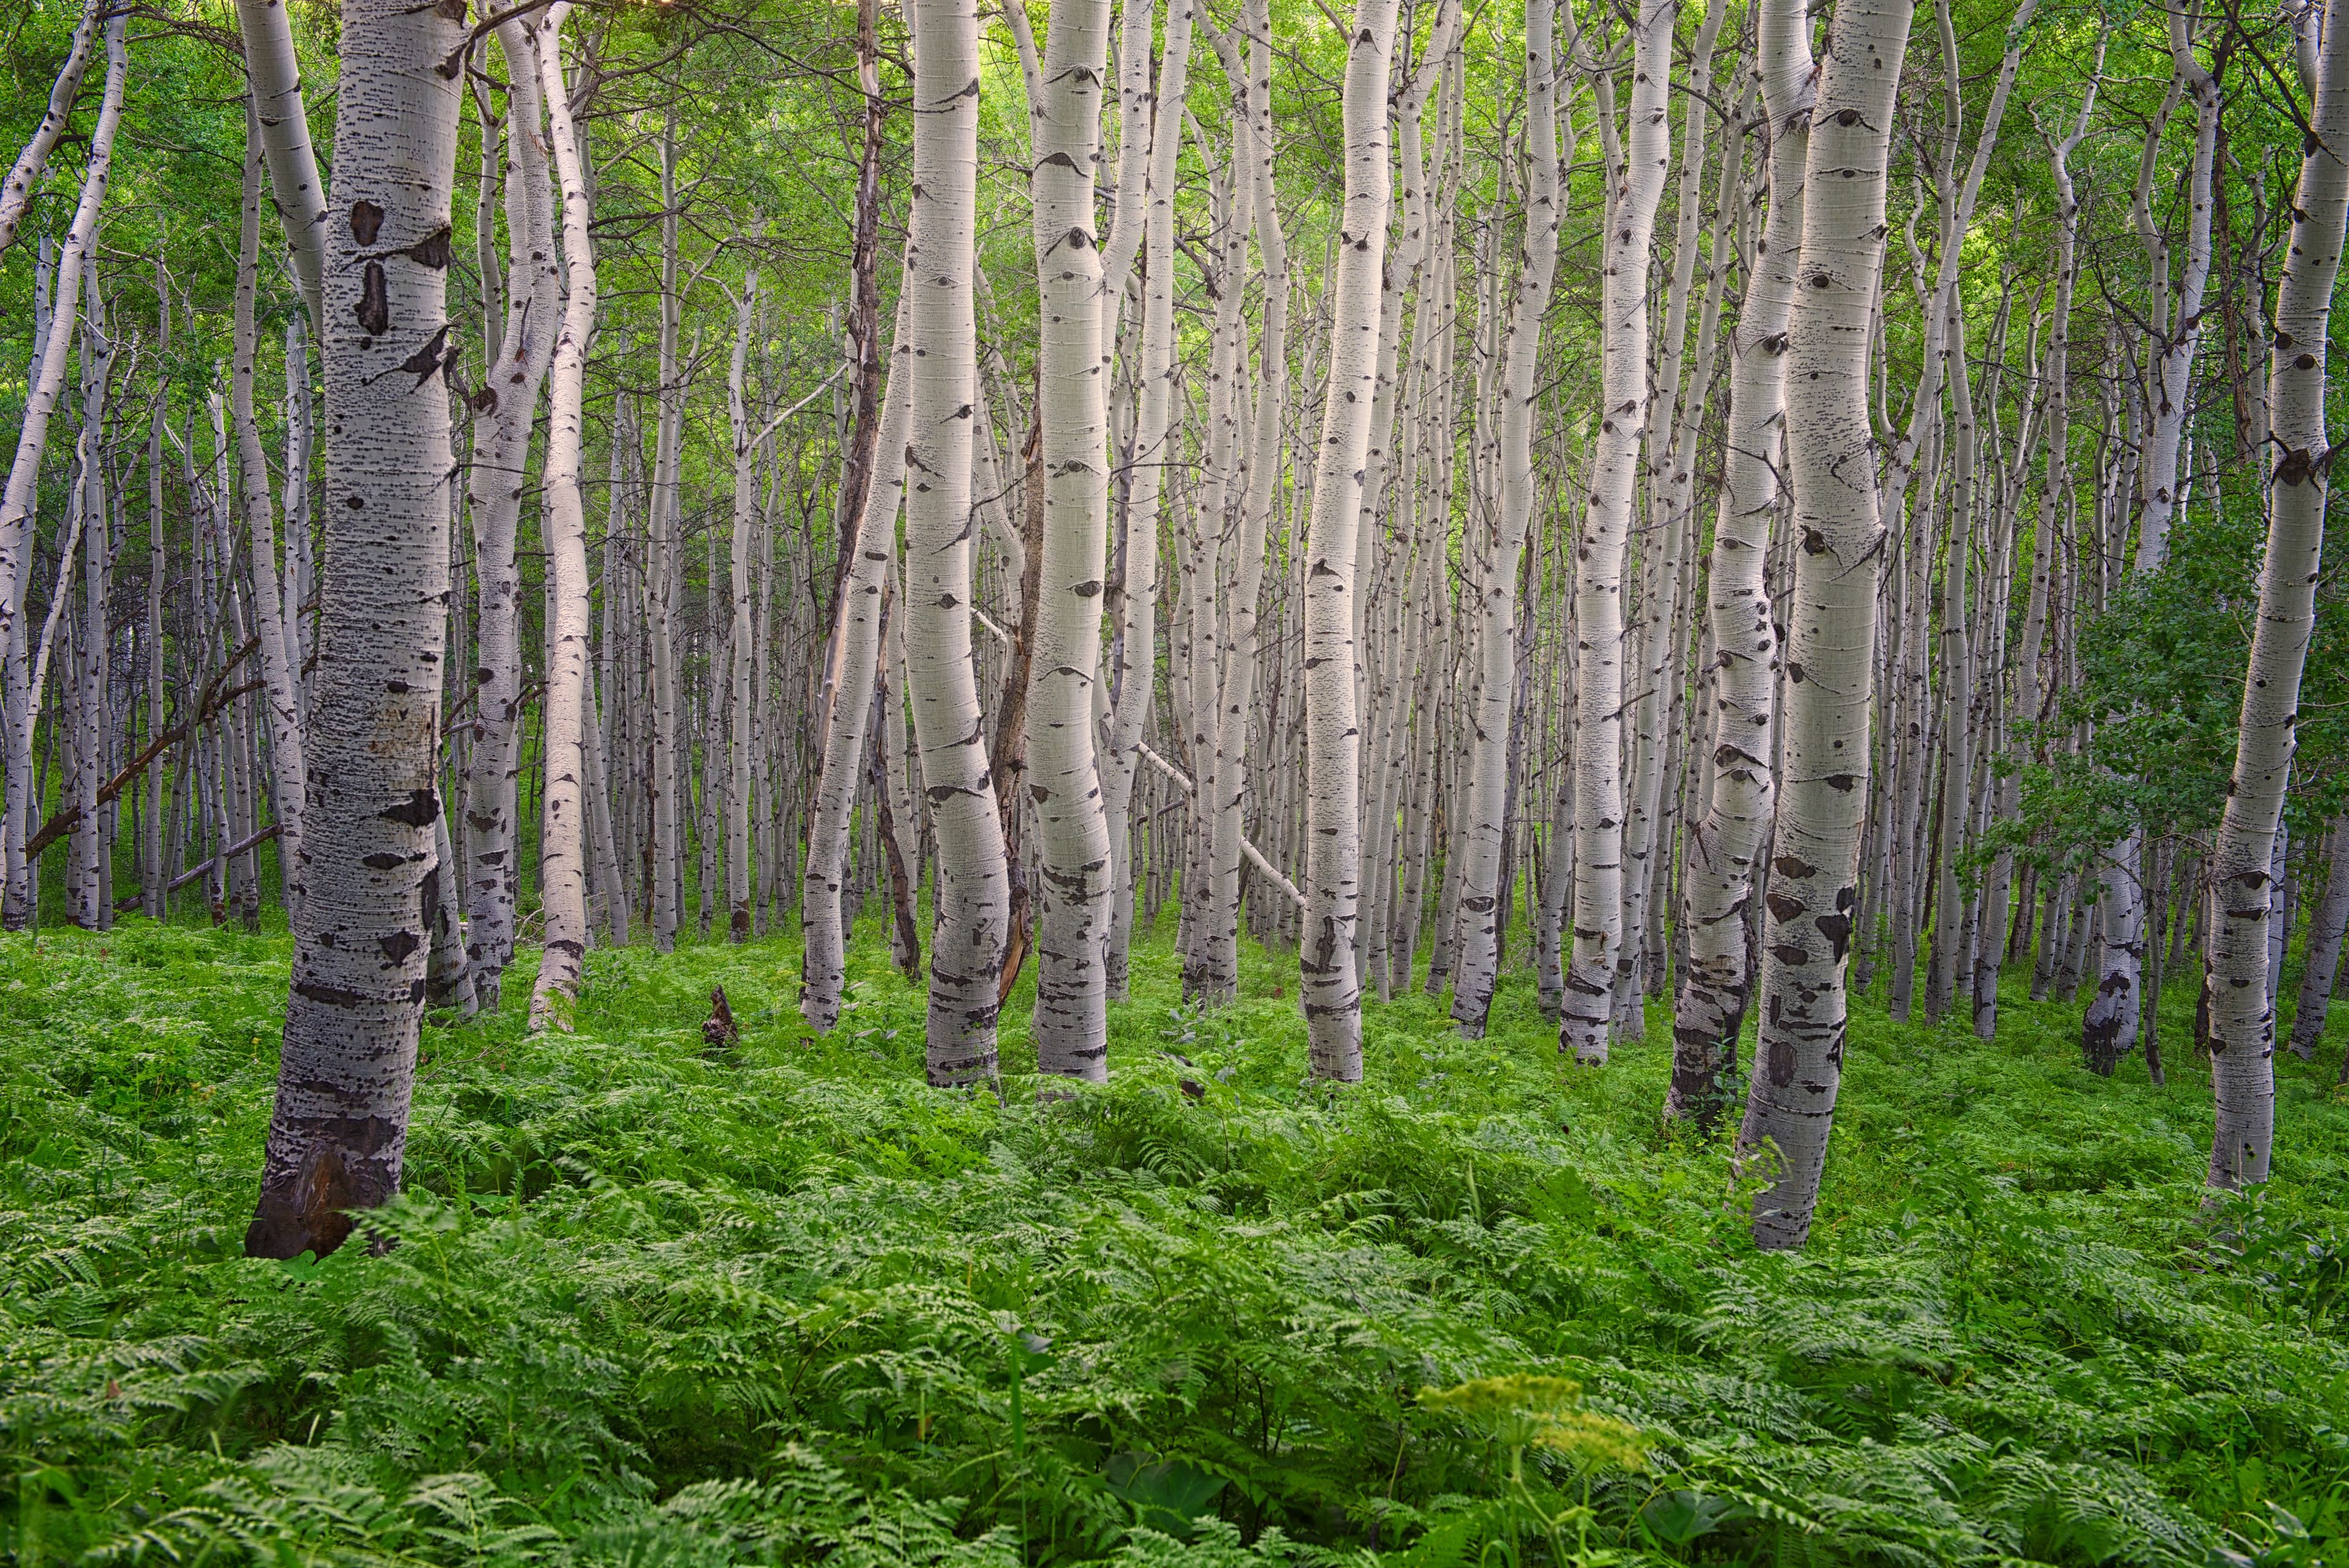 A grove of aspen trees in the summertime.